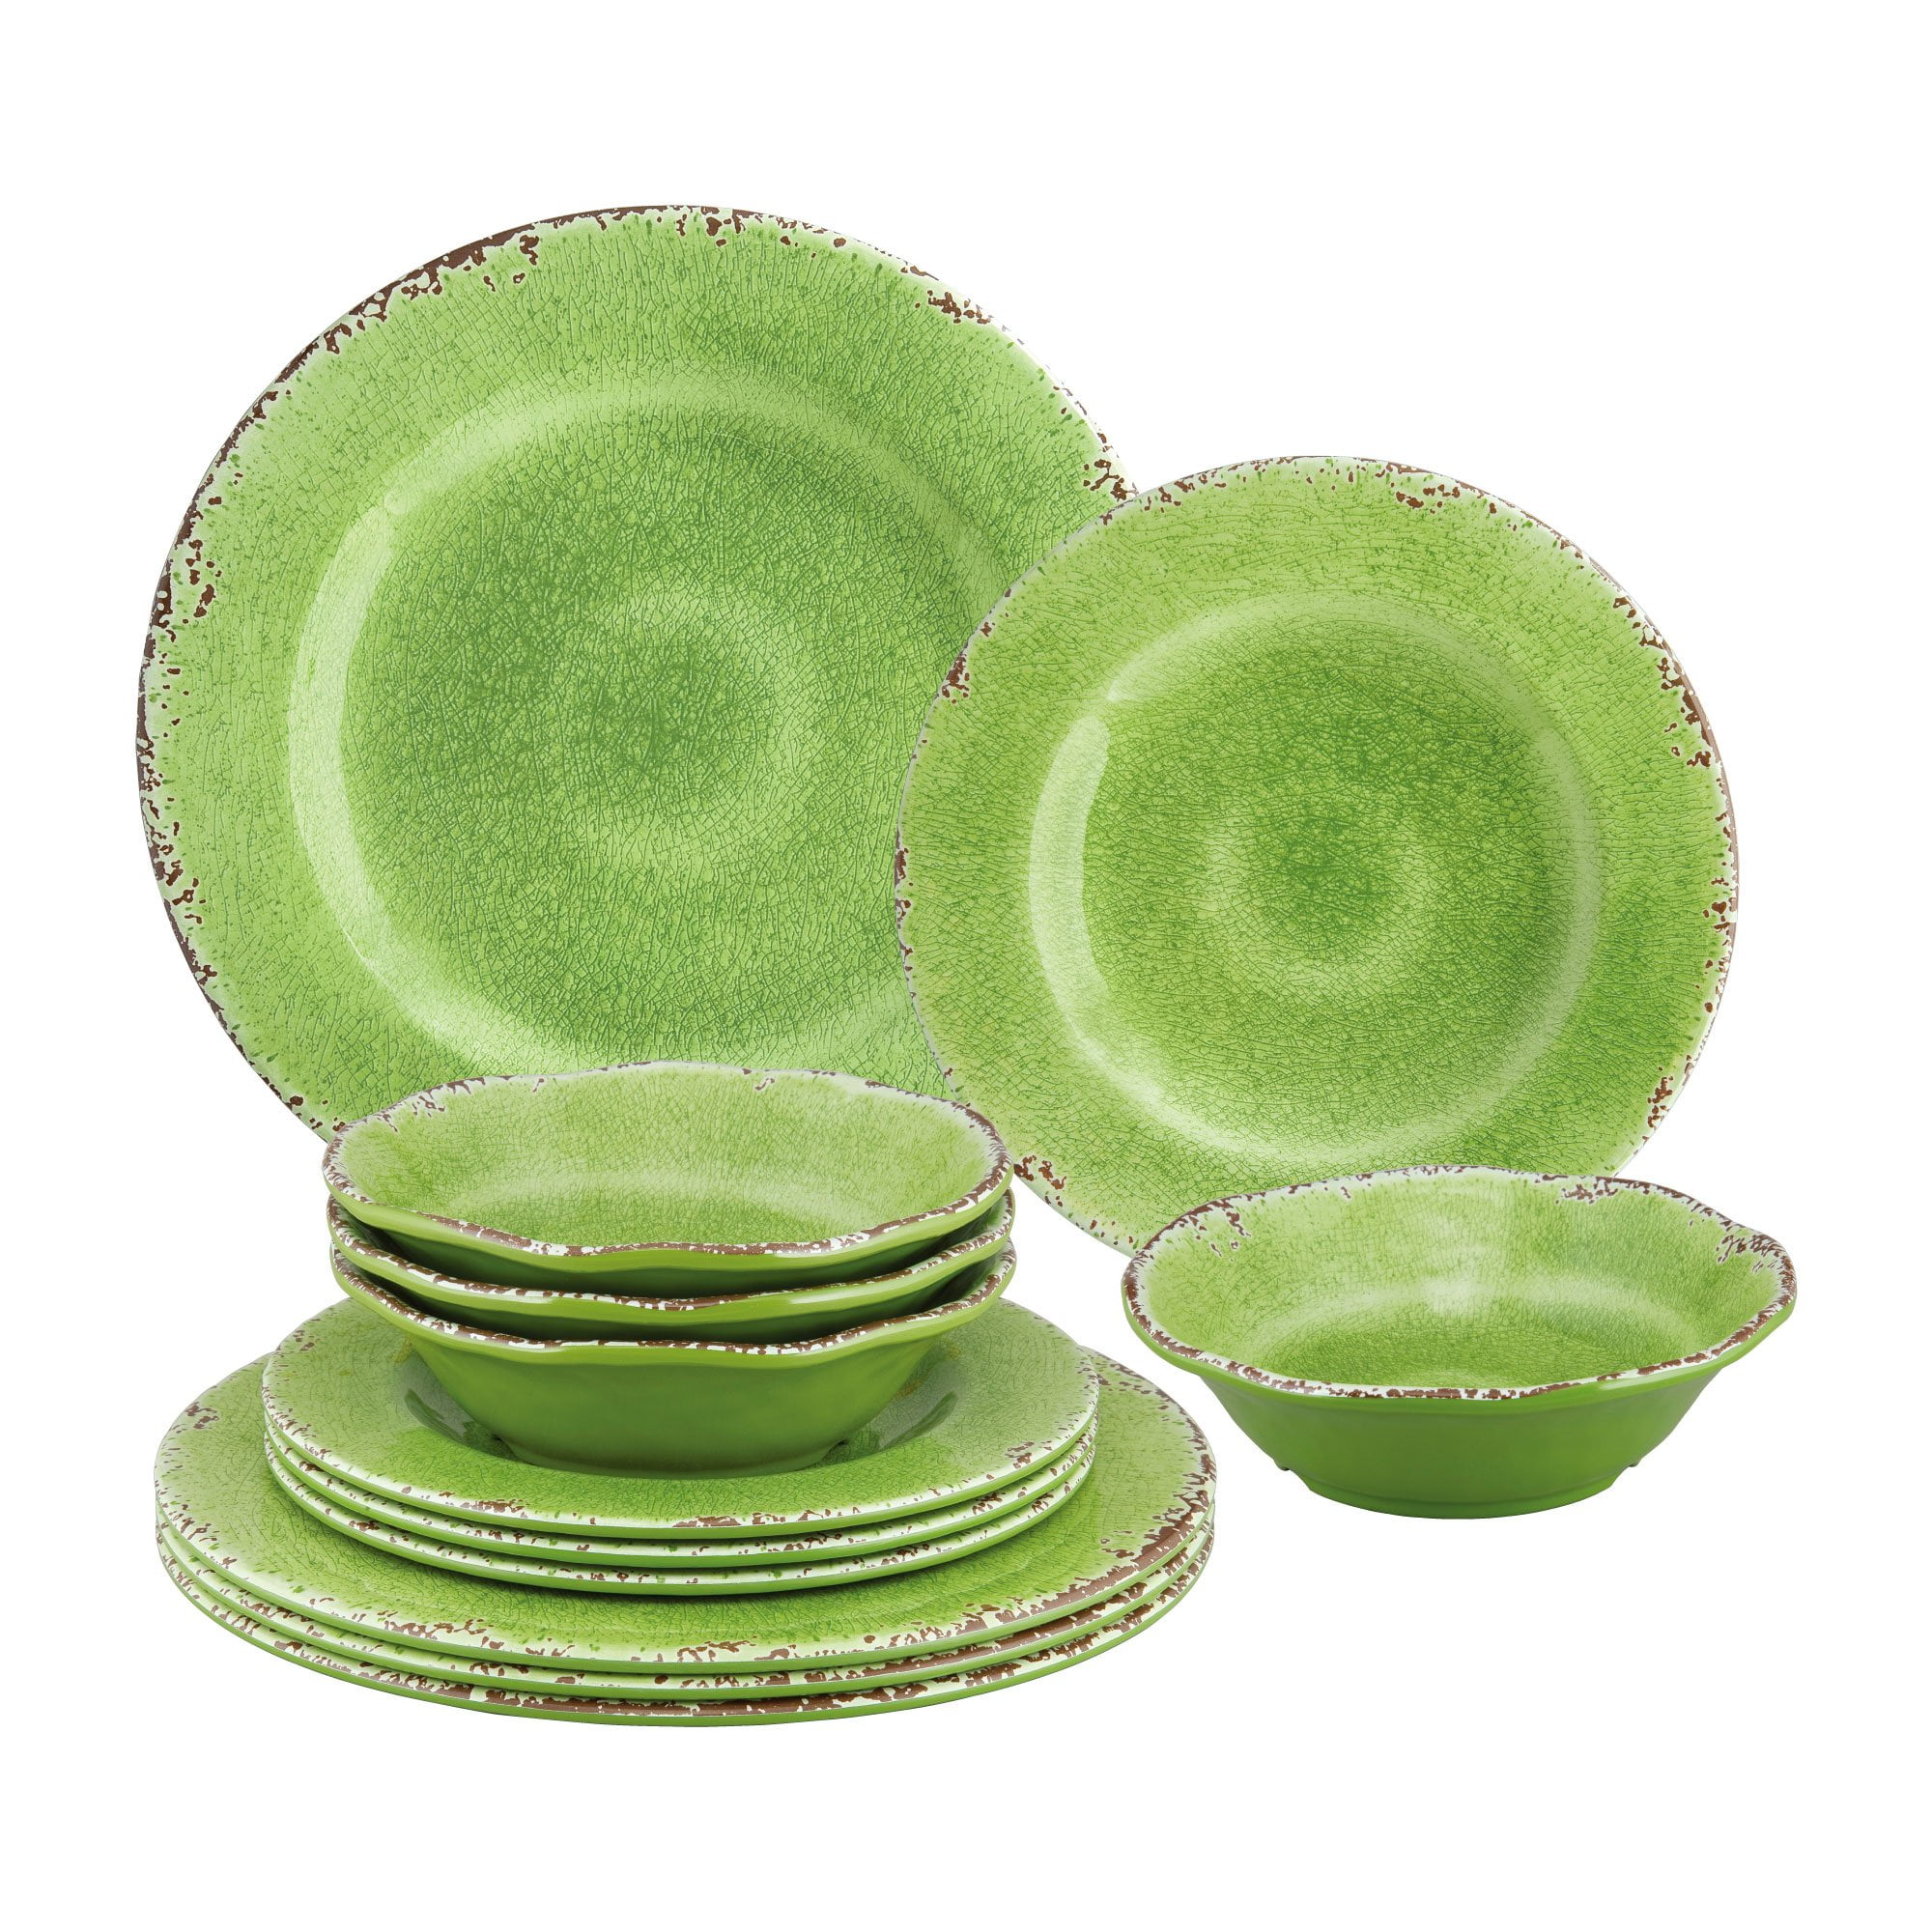 Gourmet Art 12-Piece Crackle Melamine Dinnerware Set, Green, Service for 4.  Includes Dinner Plates, Salad Plates and Bowls.